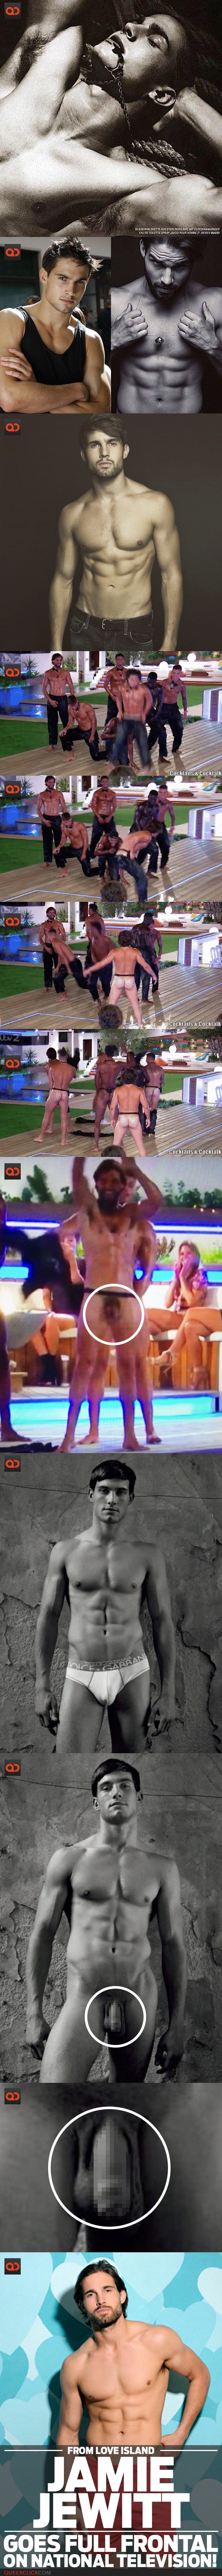 Jamie Jewitt, From Love Island, Goes Full Frontal On National Television!